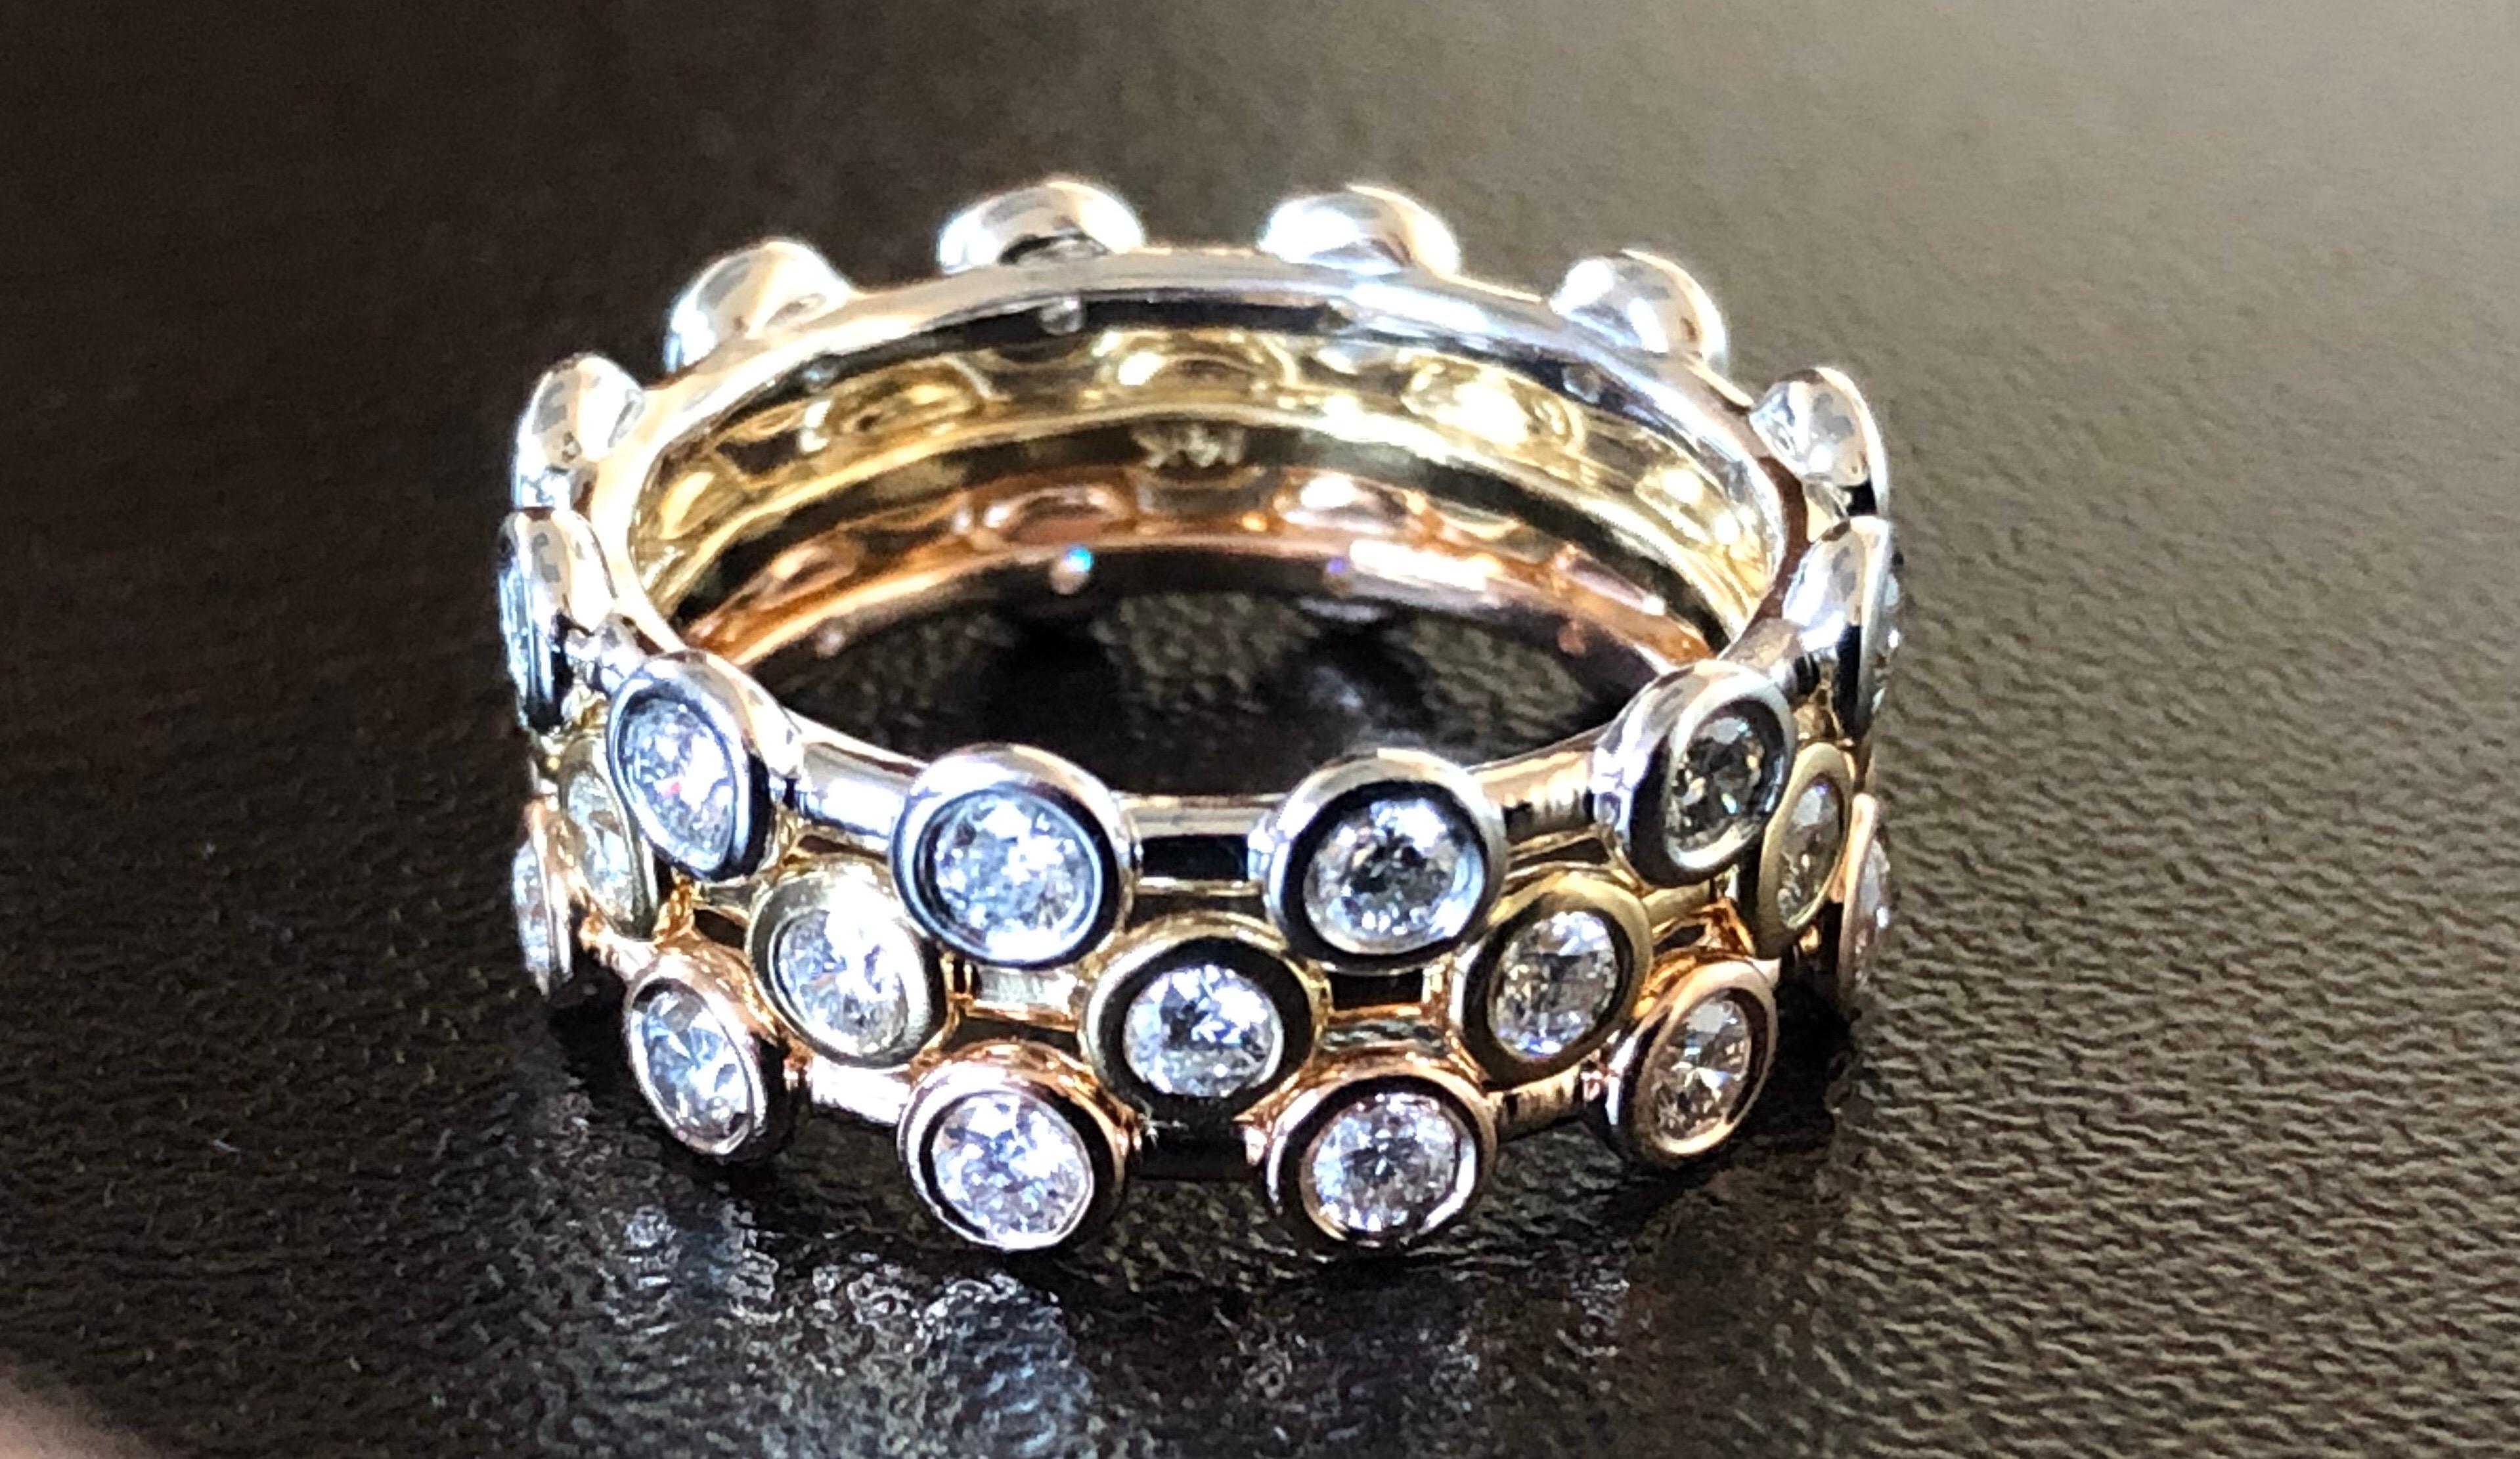 Tricolor bezel diamond rings set in 14K gold. The rings are each set with 12 diamonds and the total carat weight is 0.48 a ring. The color of the stones are G-H, the clarity is SI. Each ring is a size 6.5. The stackable rings are sold as a set.